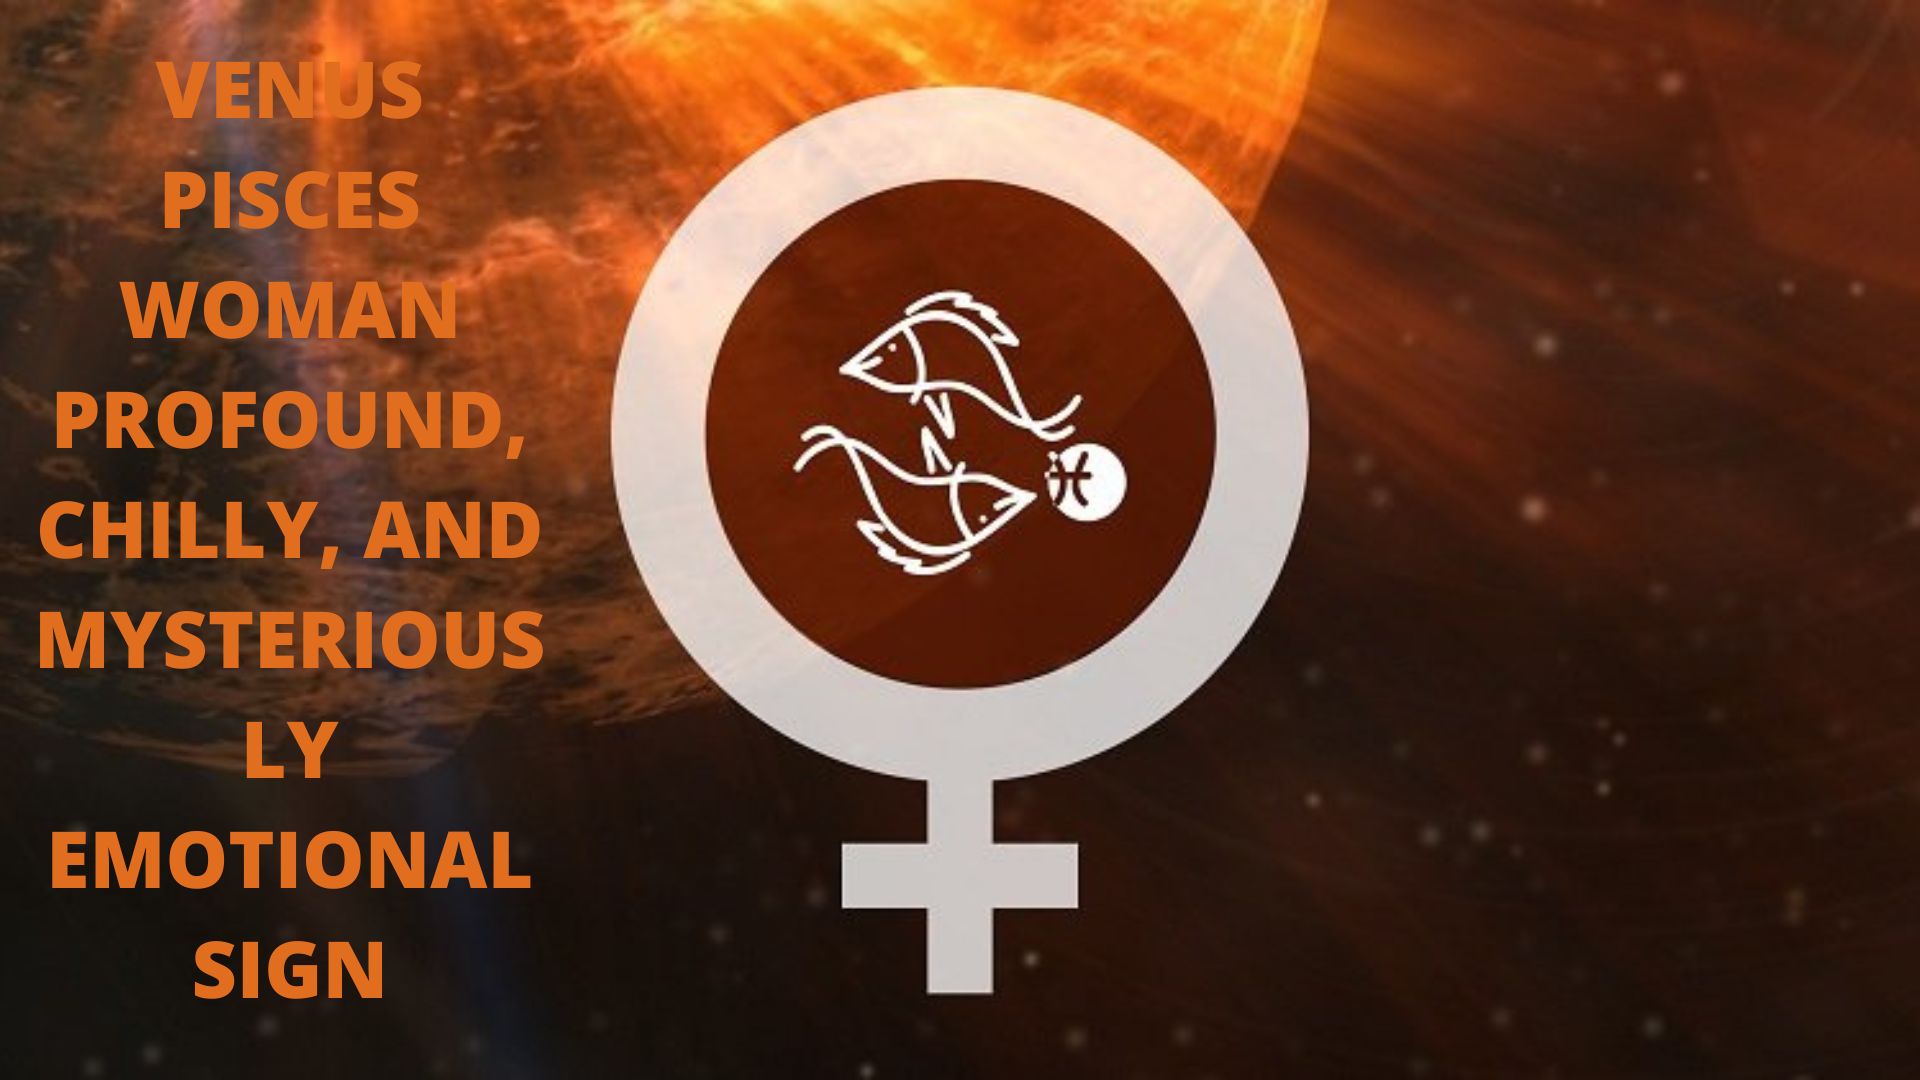 Venus Pisces Woman - Profound, Chilly, And Mysteriously Emotional Sign